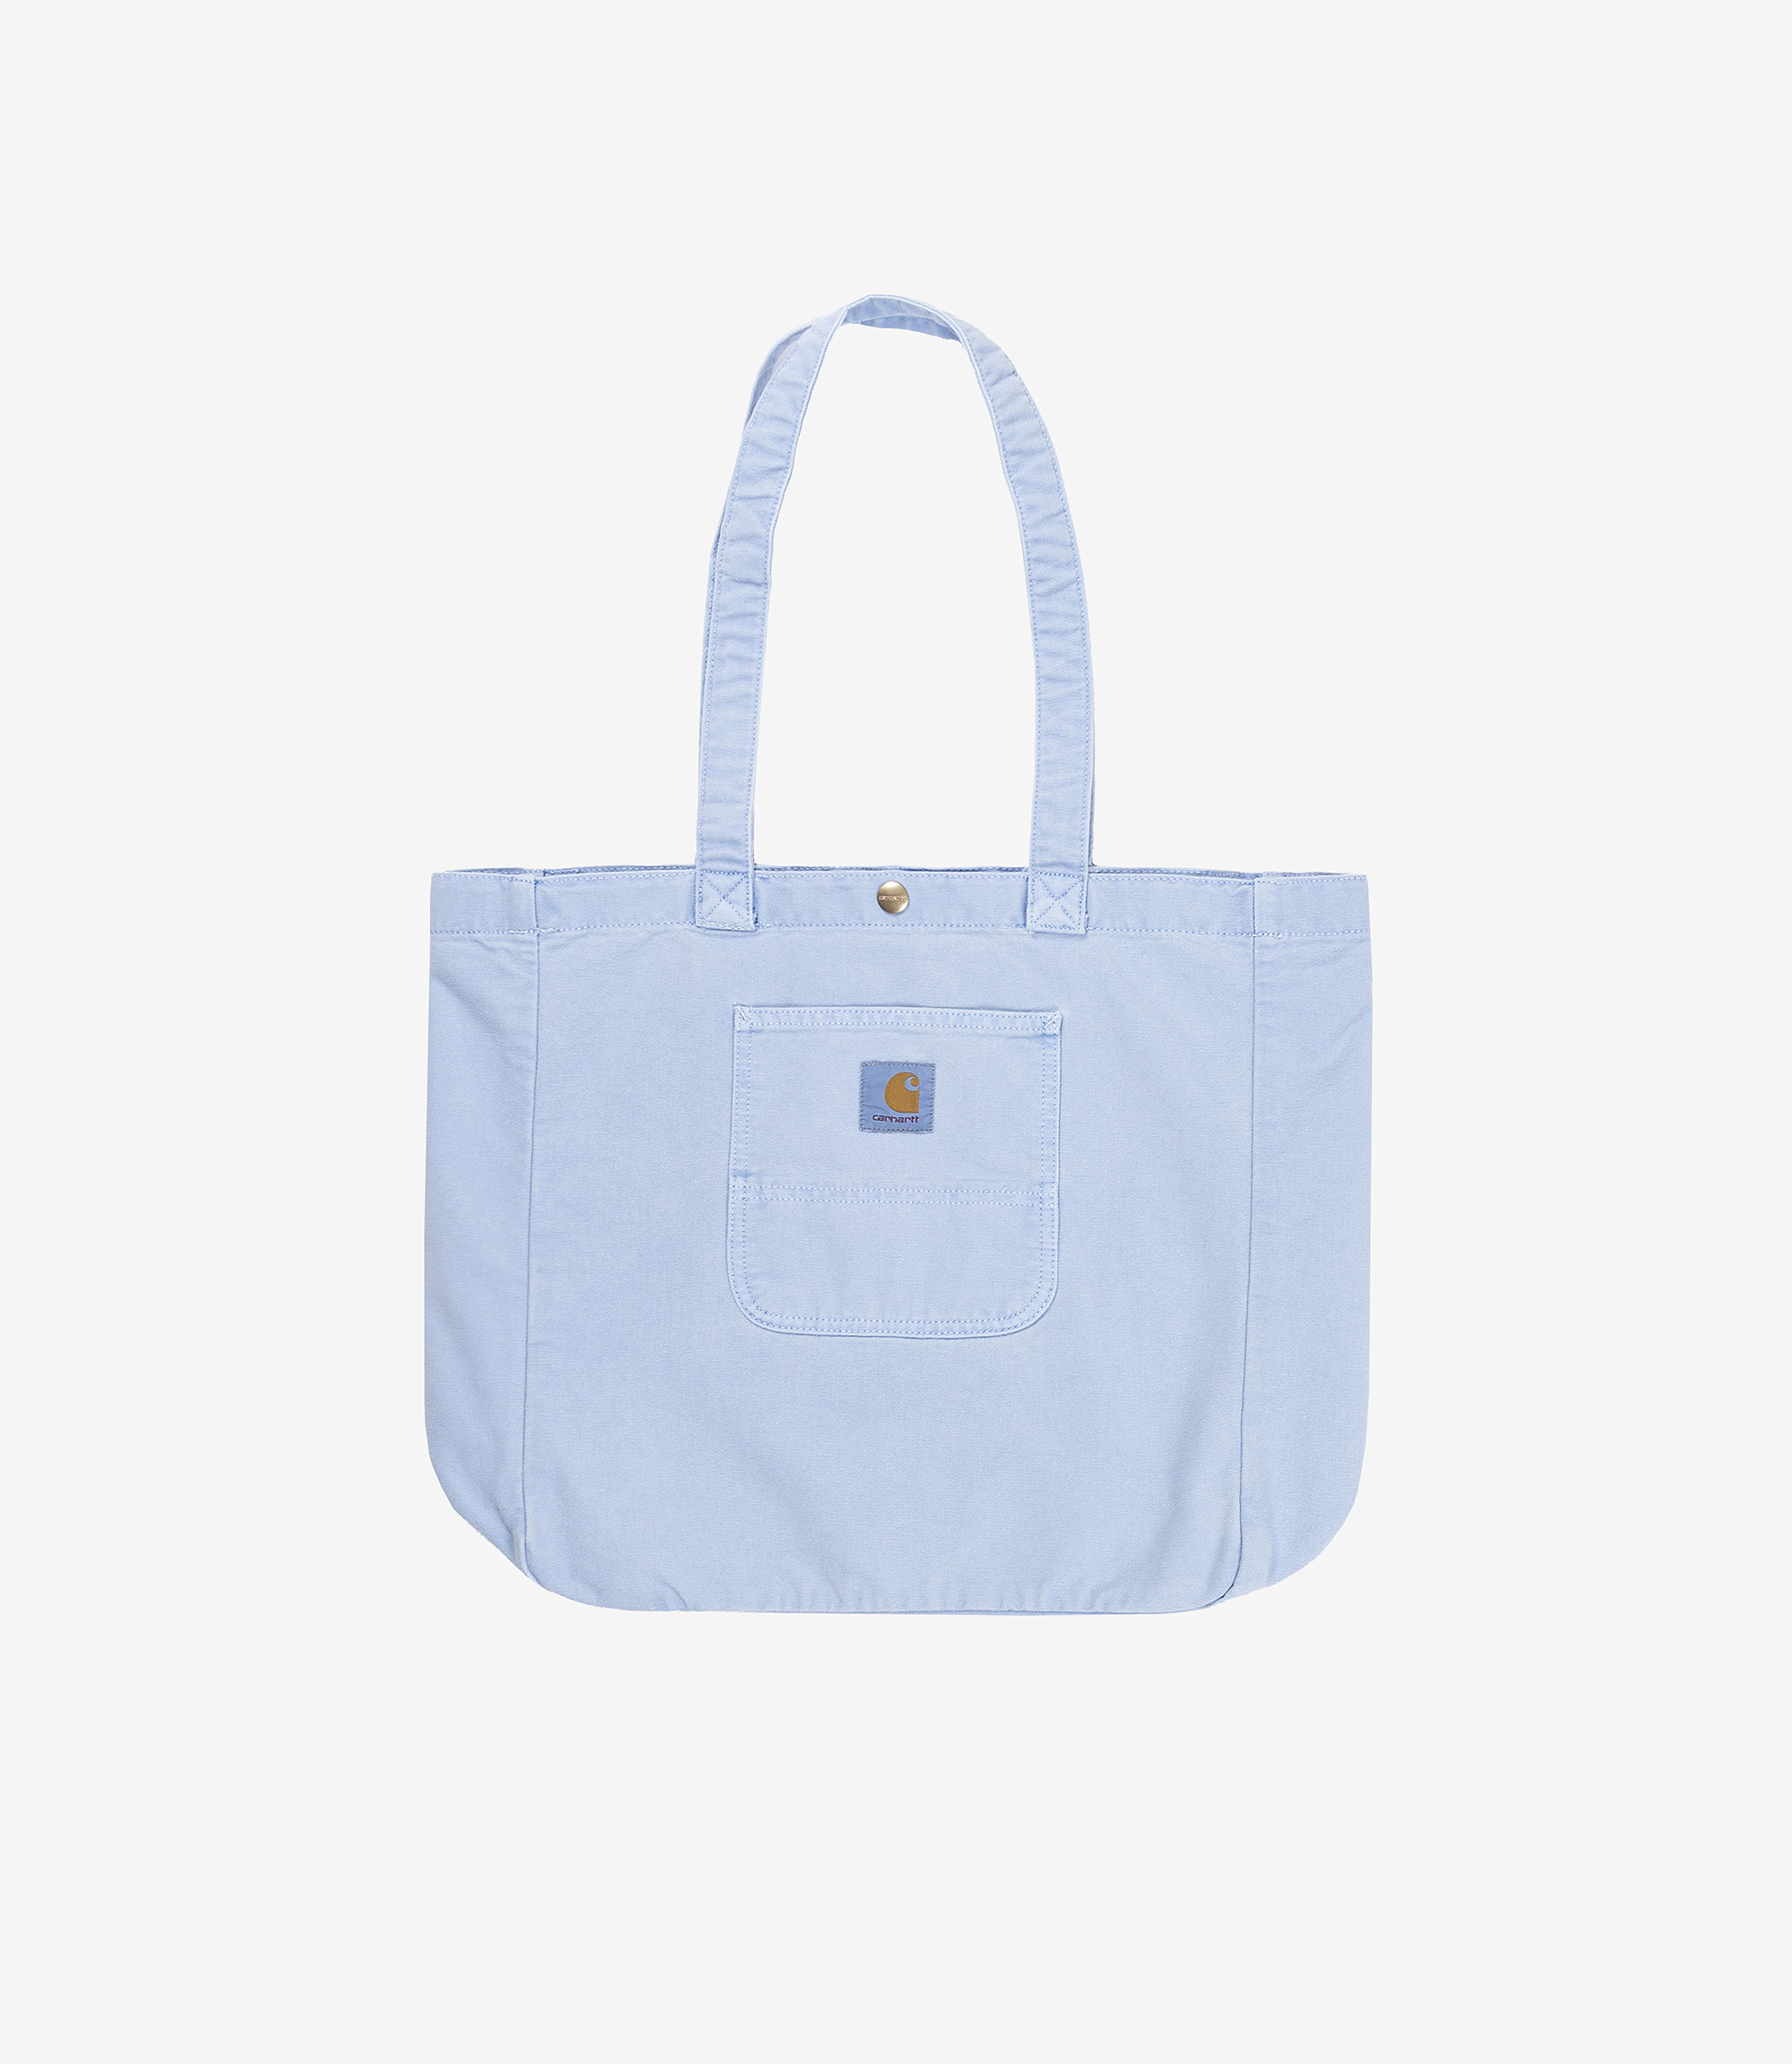 Shop Carhartt WIP Bayfield Tote 'Dearborn' Canvas Piscine at itk